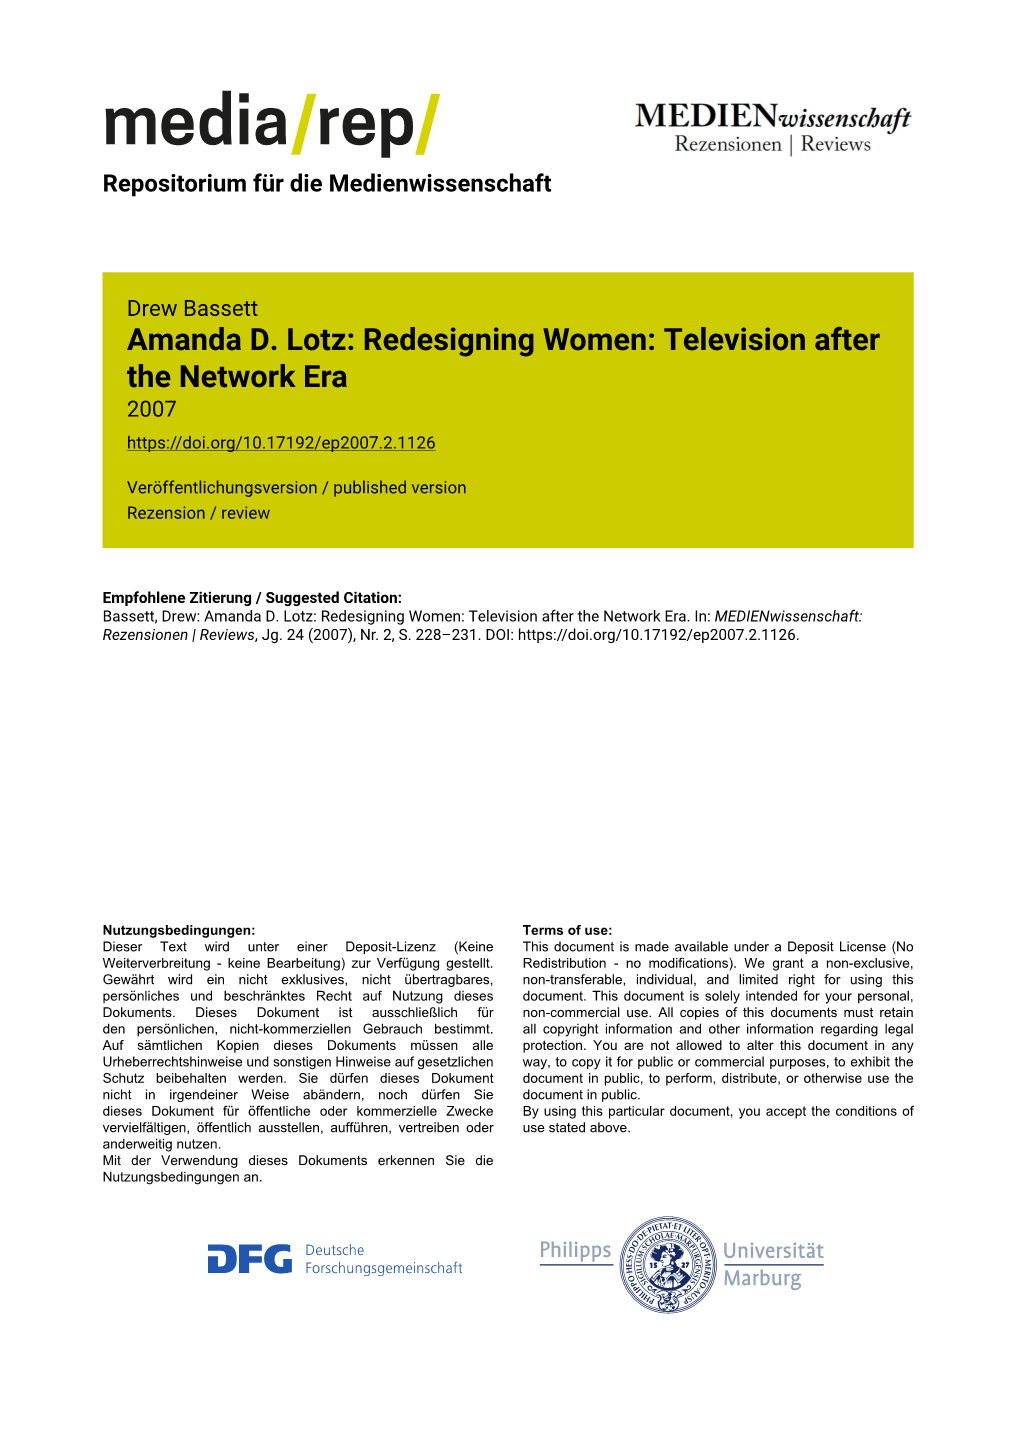 Amanda D. Lotz: Redesigning Women: Television After the Network Era 2007